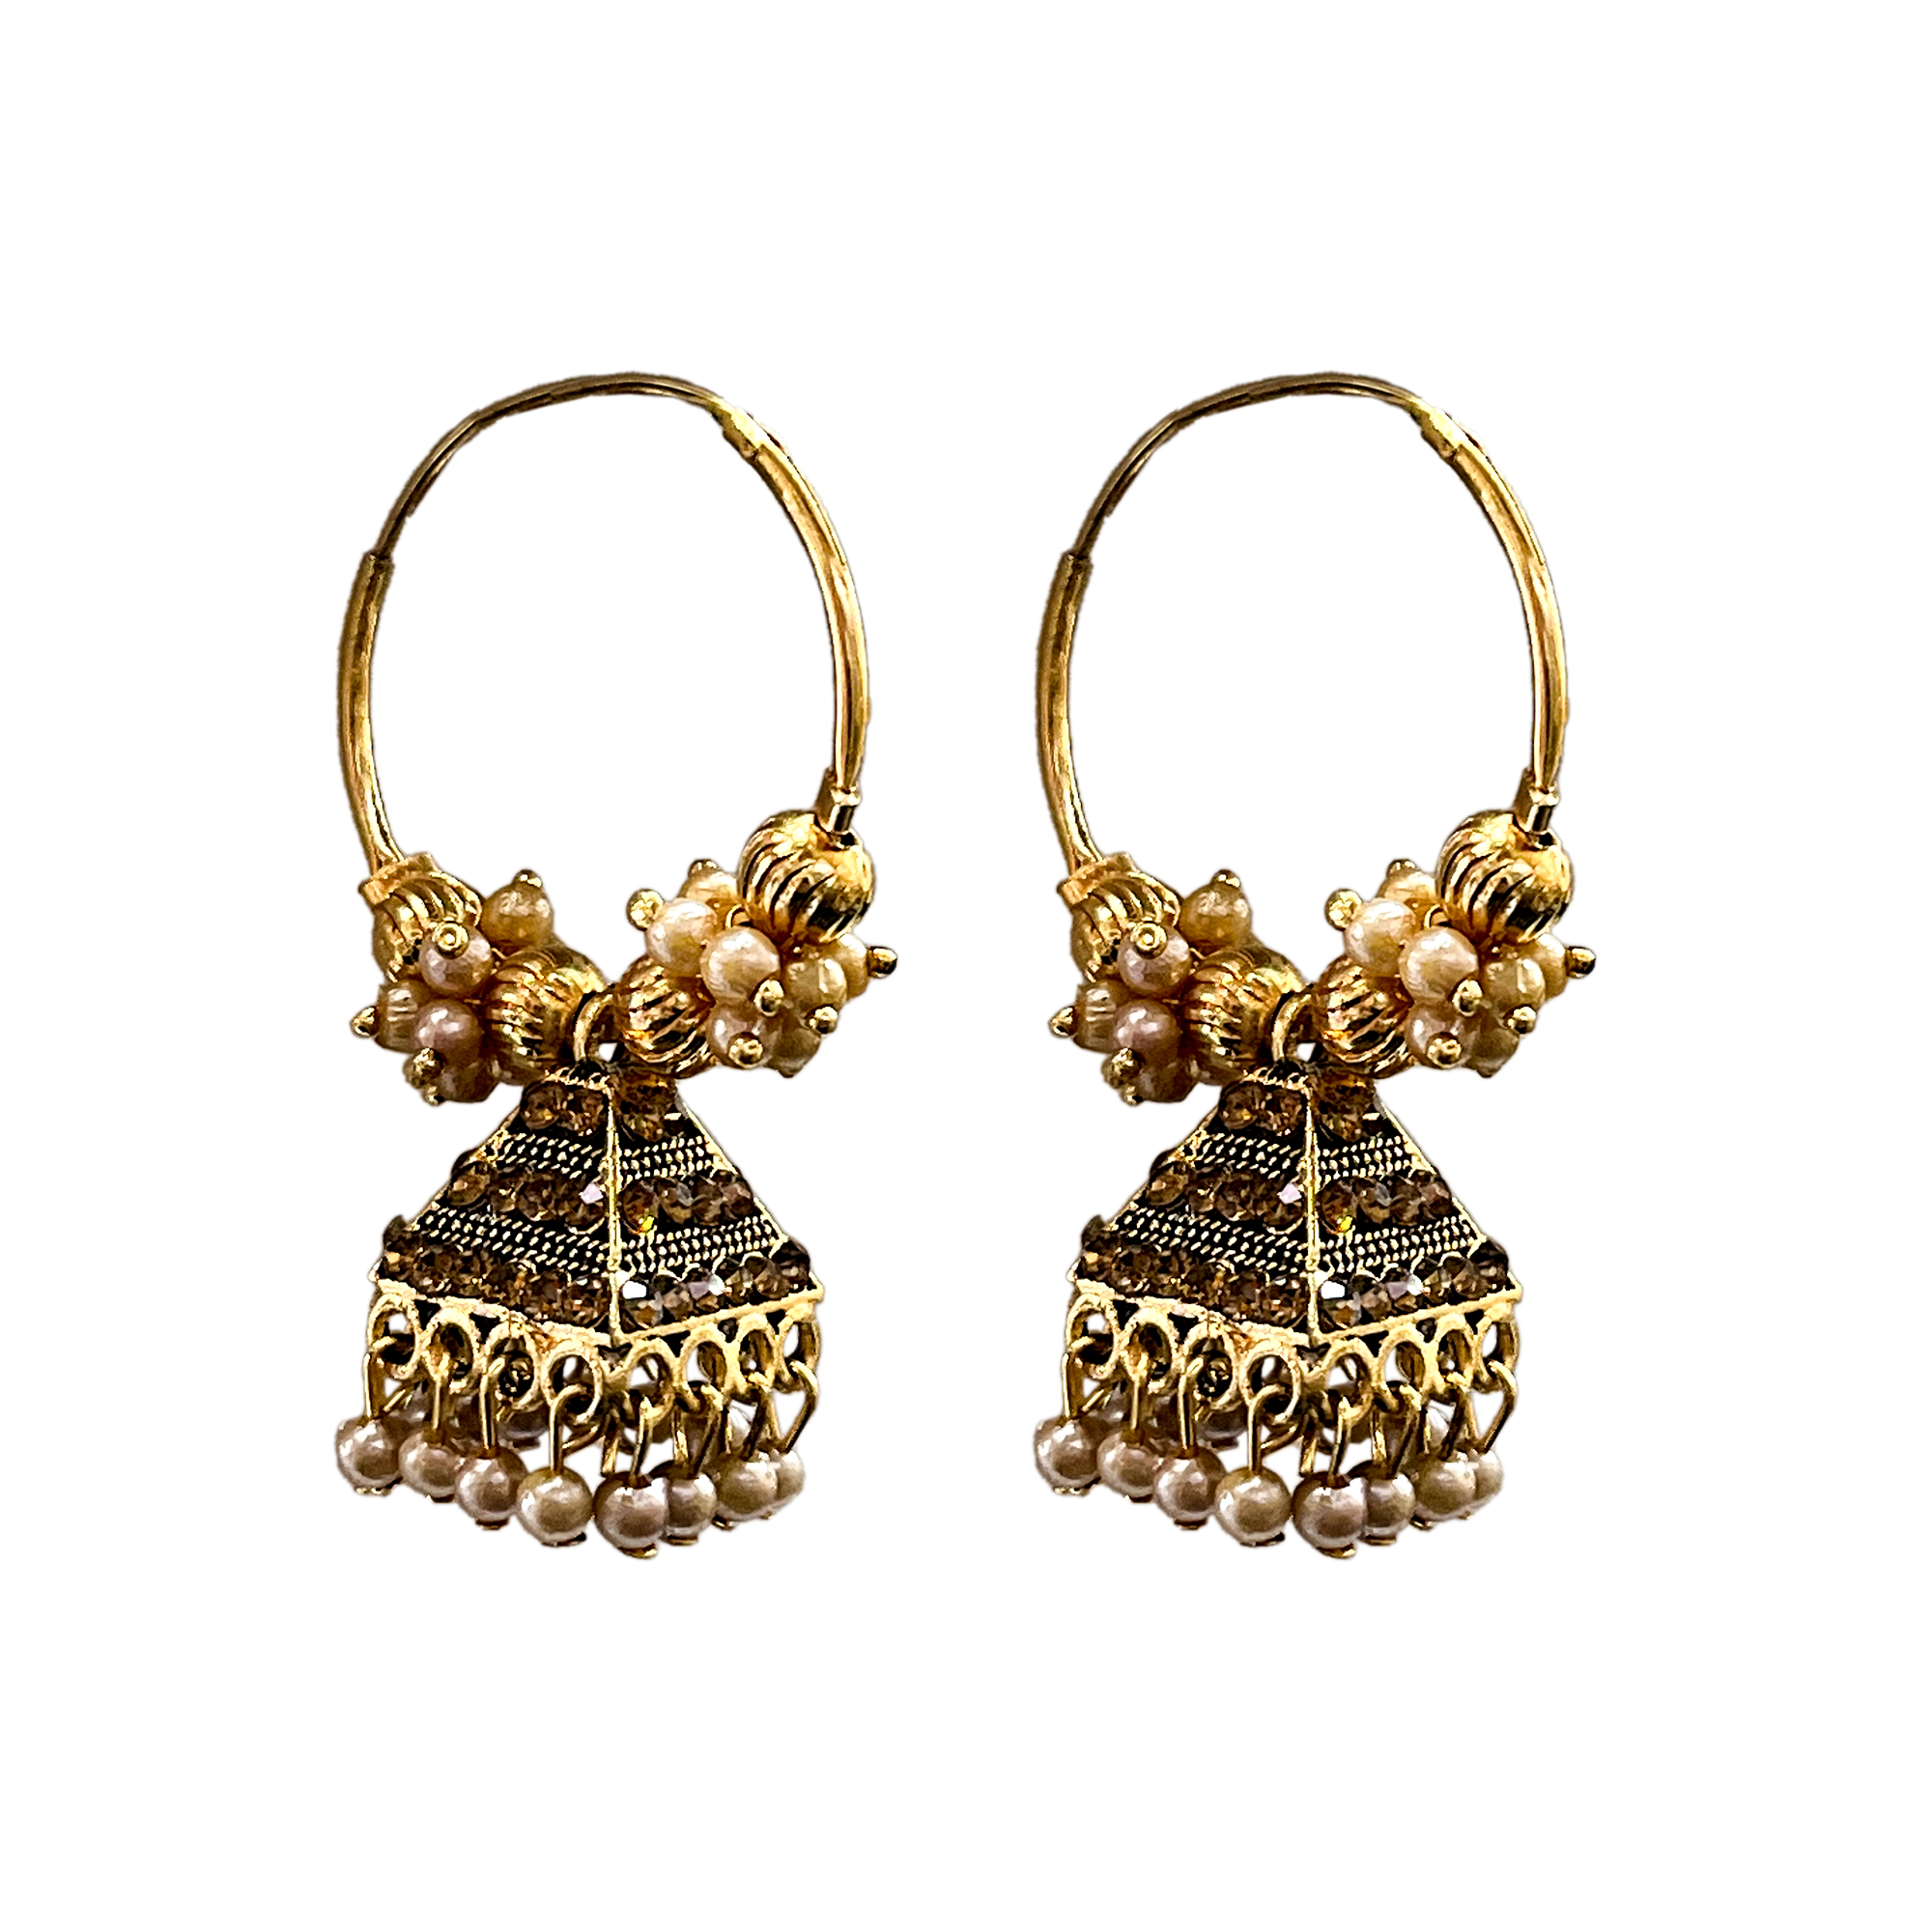 Light Weighted Gold Bali Earrings